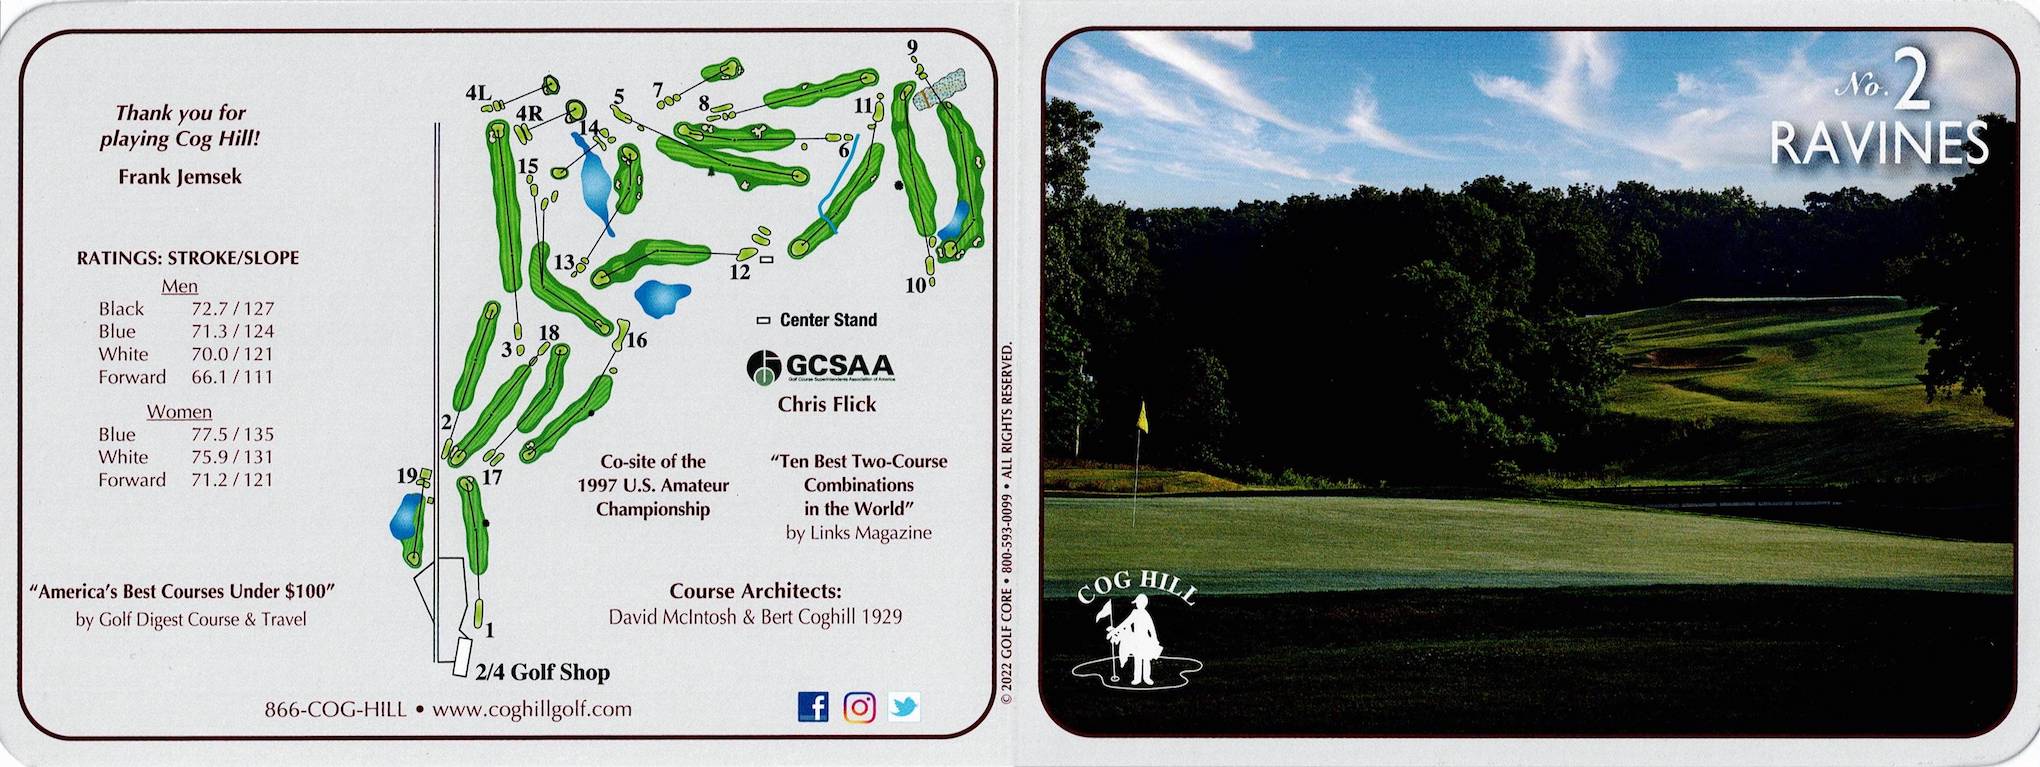 Scan of the scorecard from Cog Hill Course #2 - Ravines in Lemont, Illinois. 